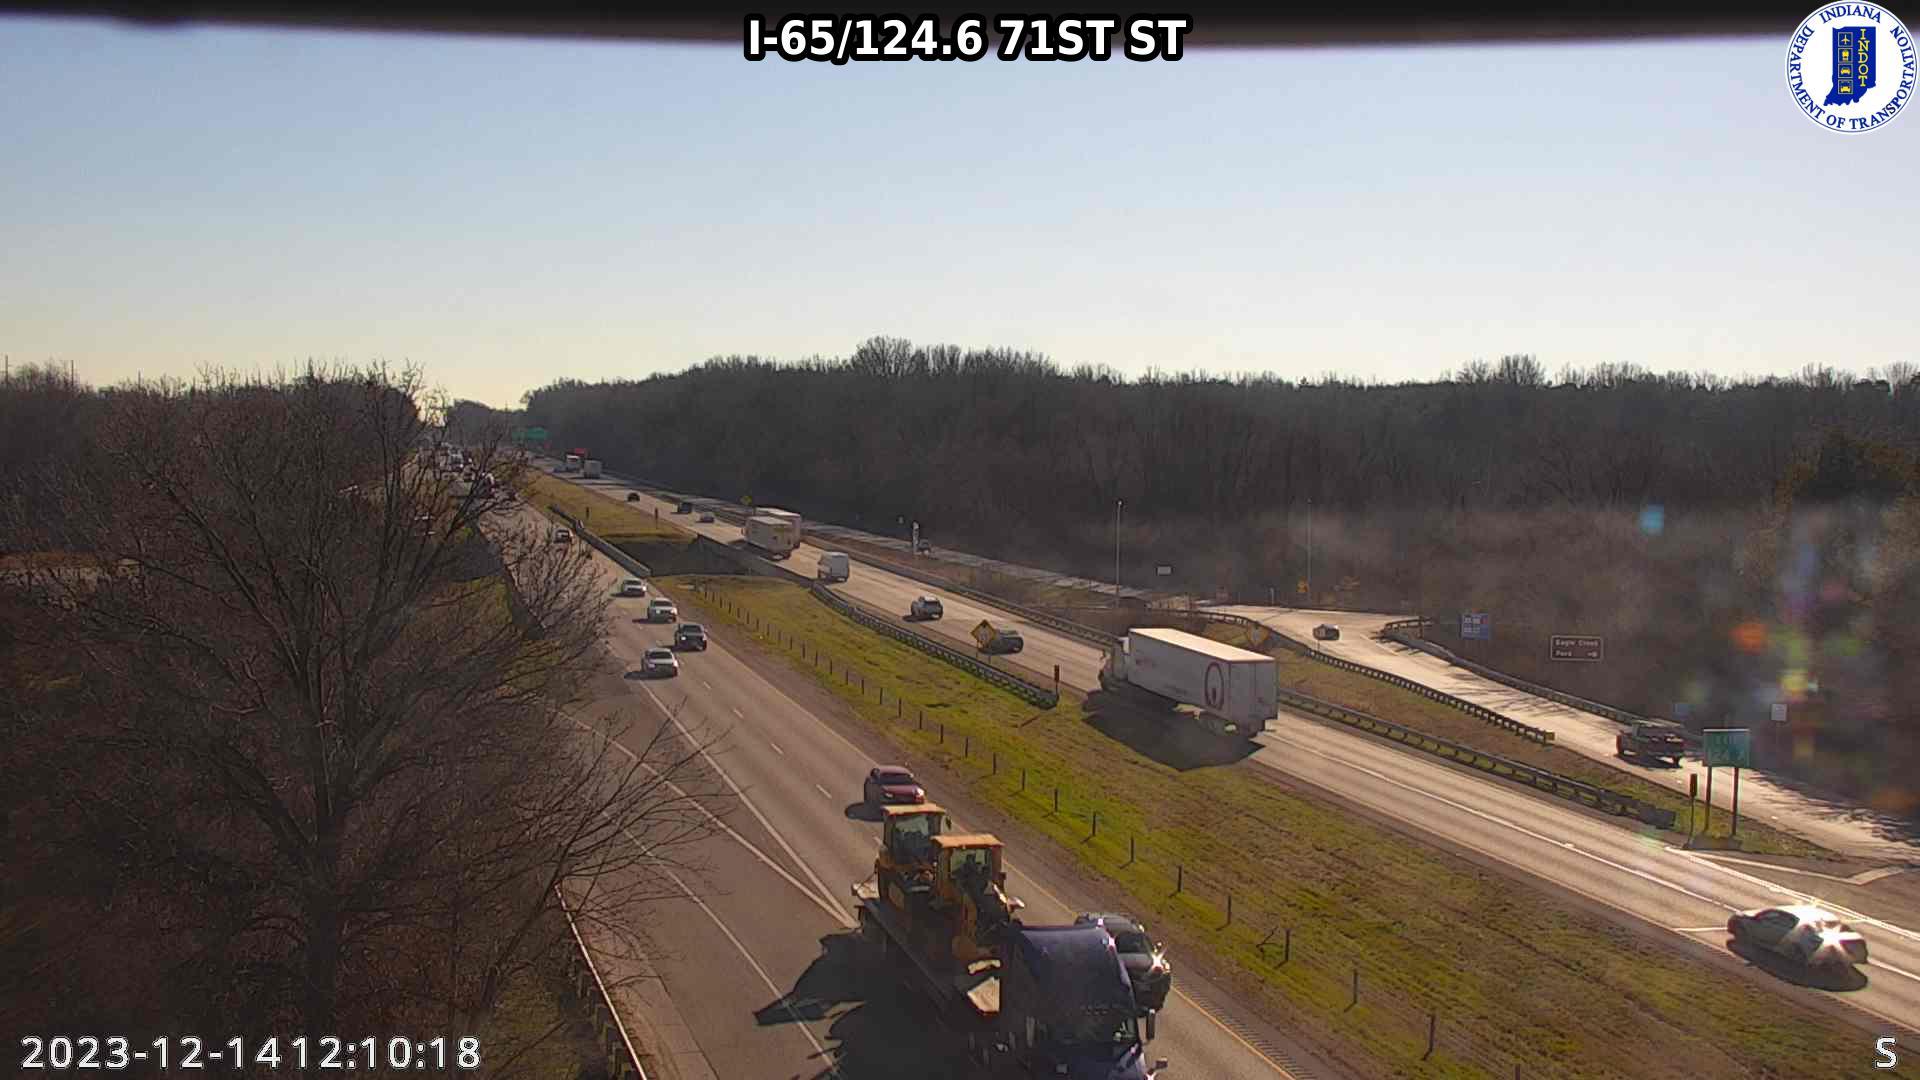 Traffic Cam Indianapolis: I-65: I-65/124.6 71ST ST Player